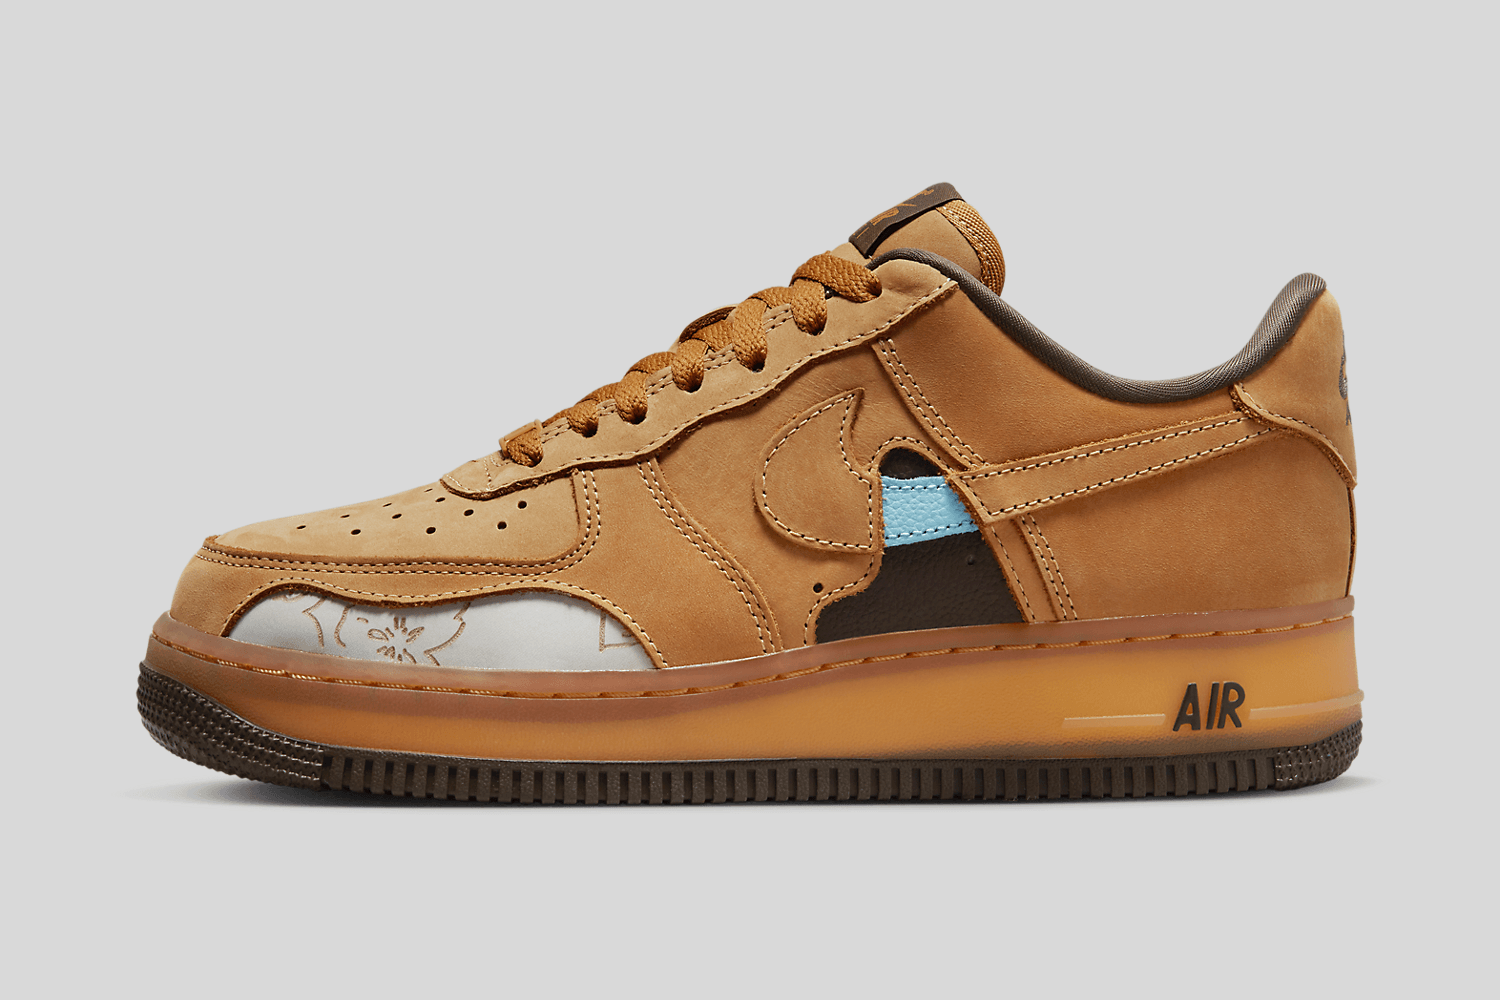 Nike brings back the Air Force 1 Low CO.JP 'Wheat' but with a twist